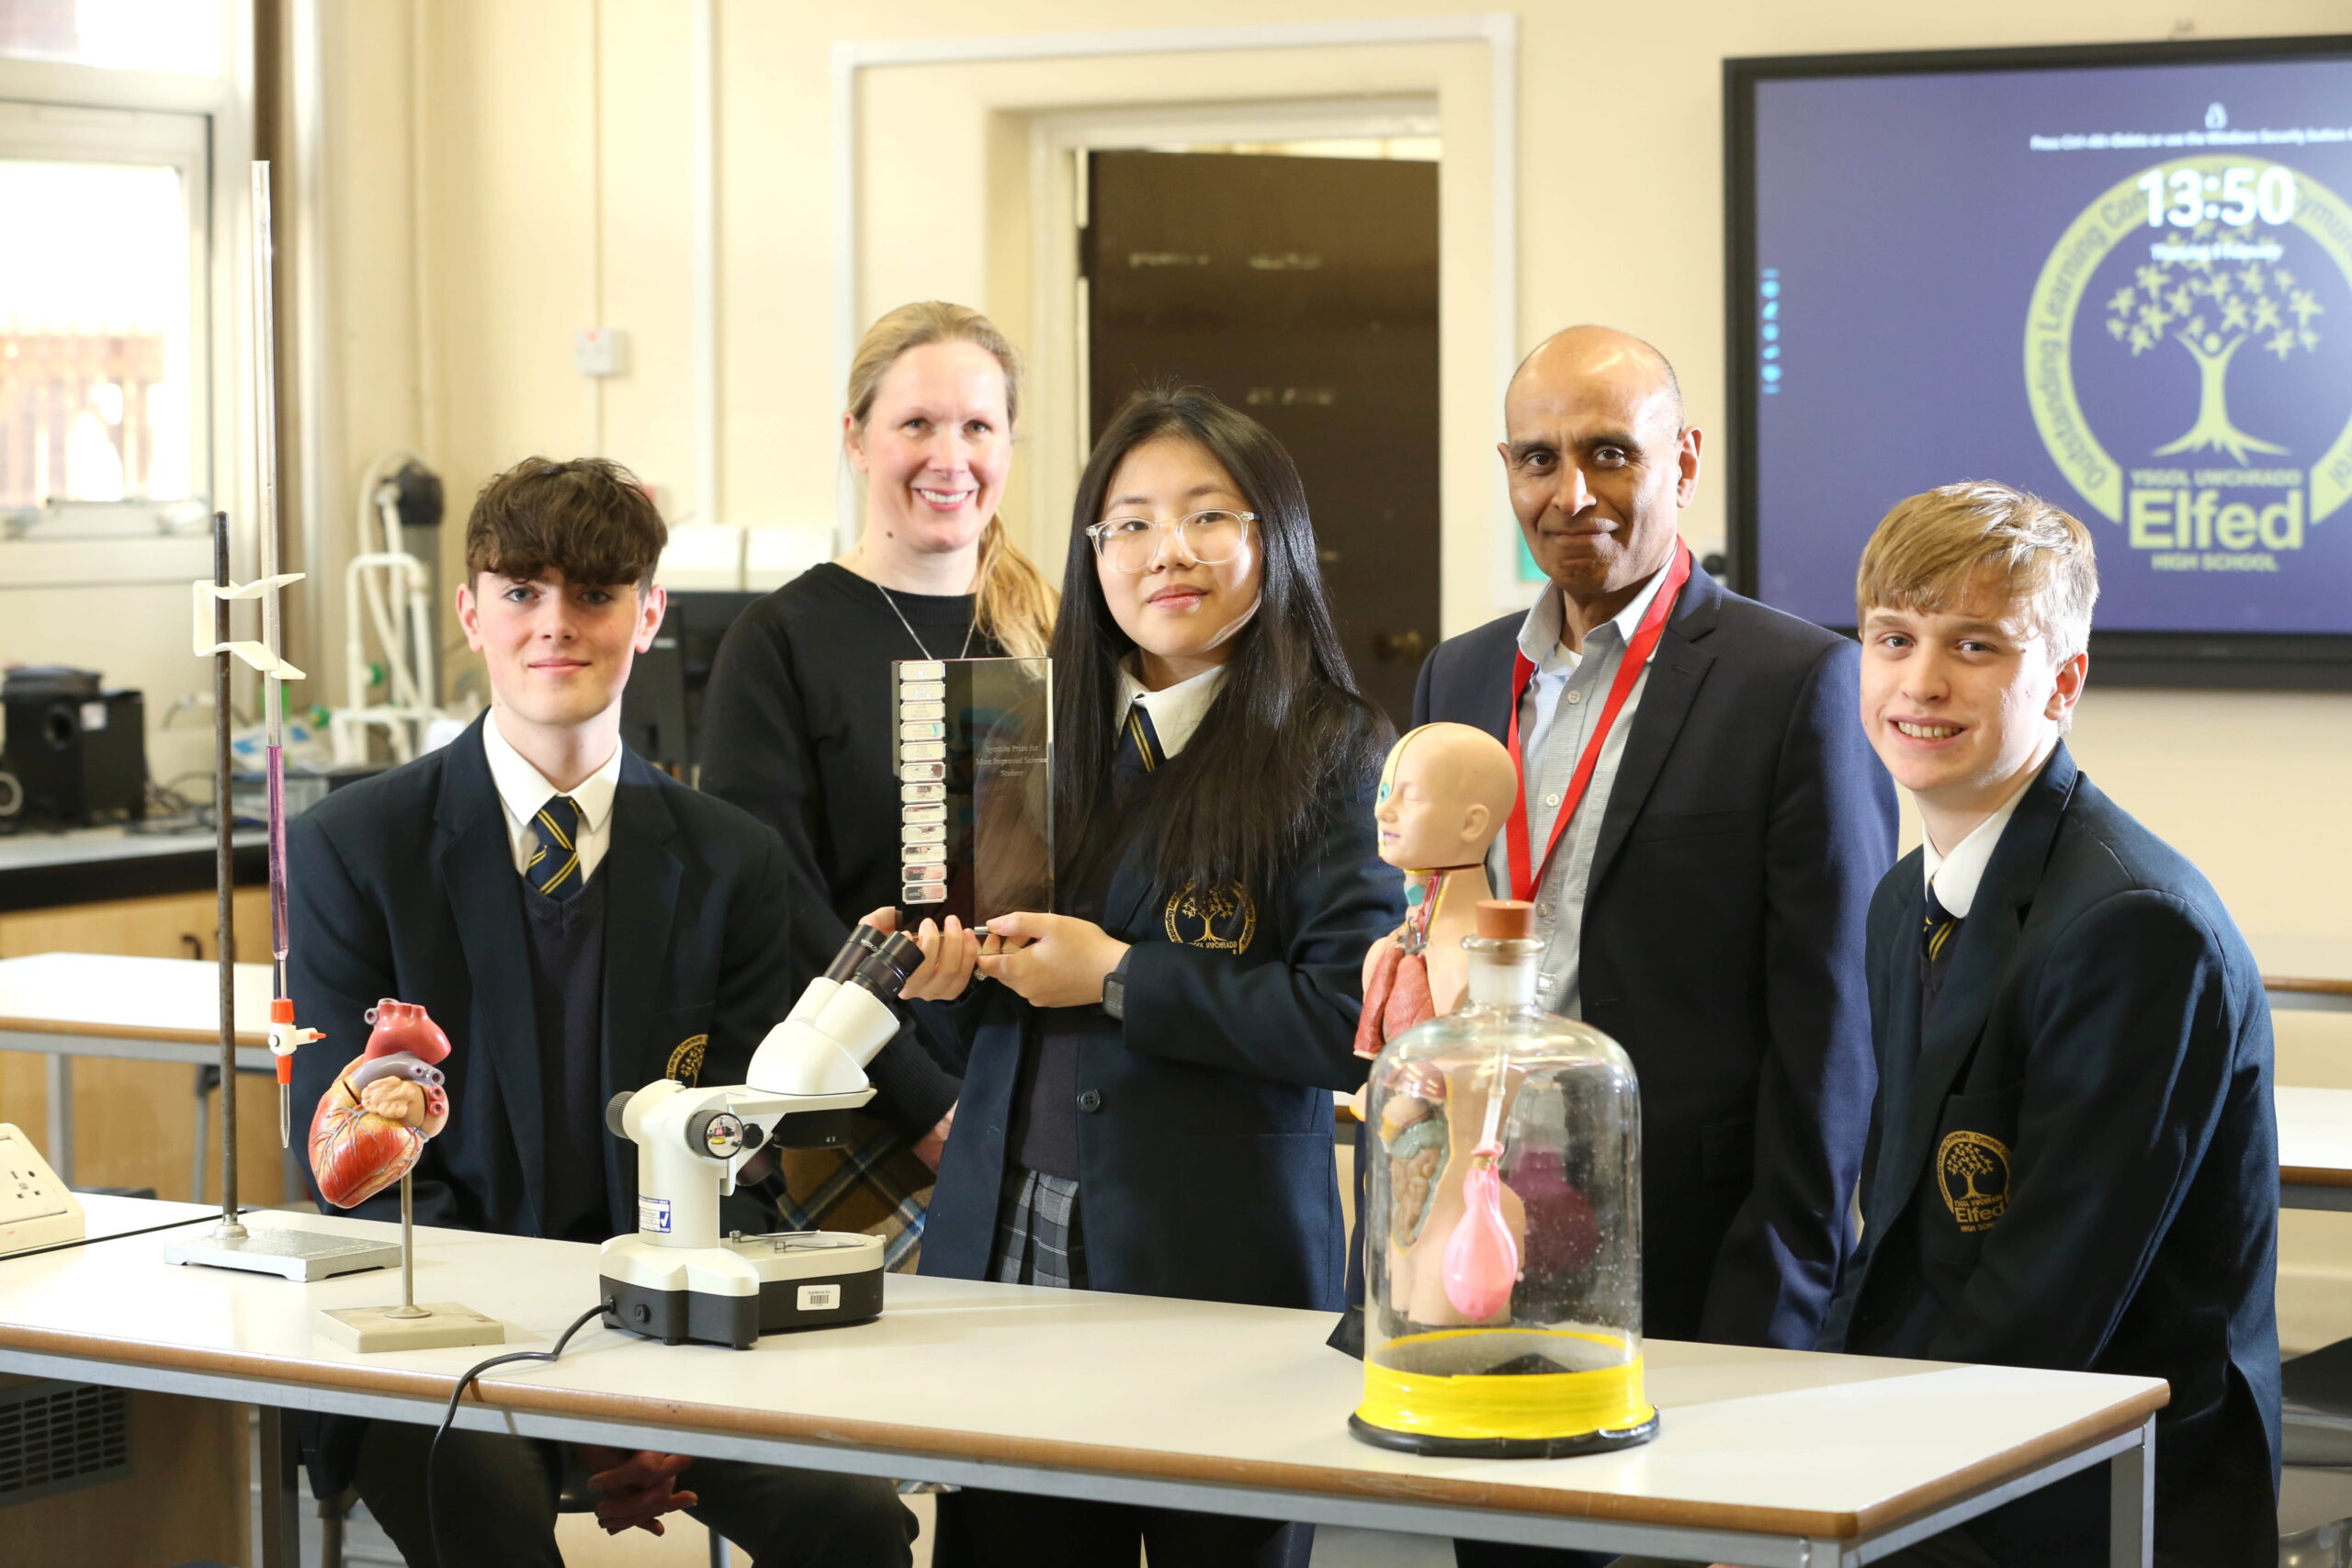 High-achieving Flintshire pupils set their sights on careers in medicine